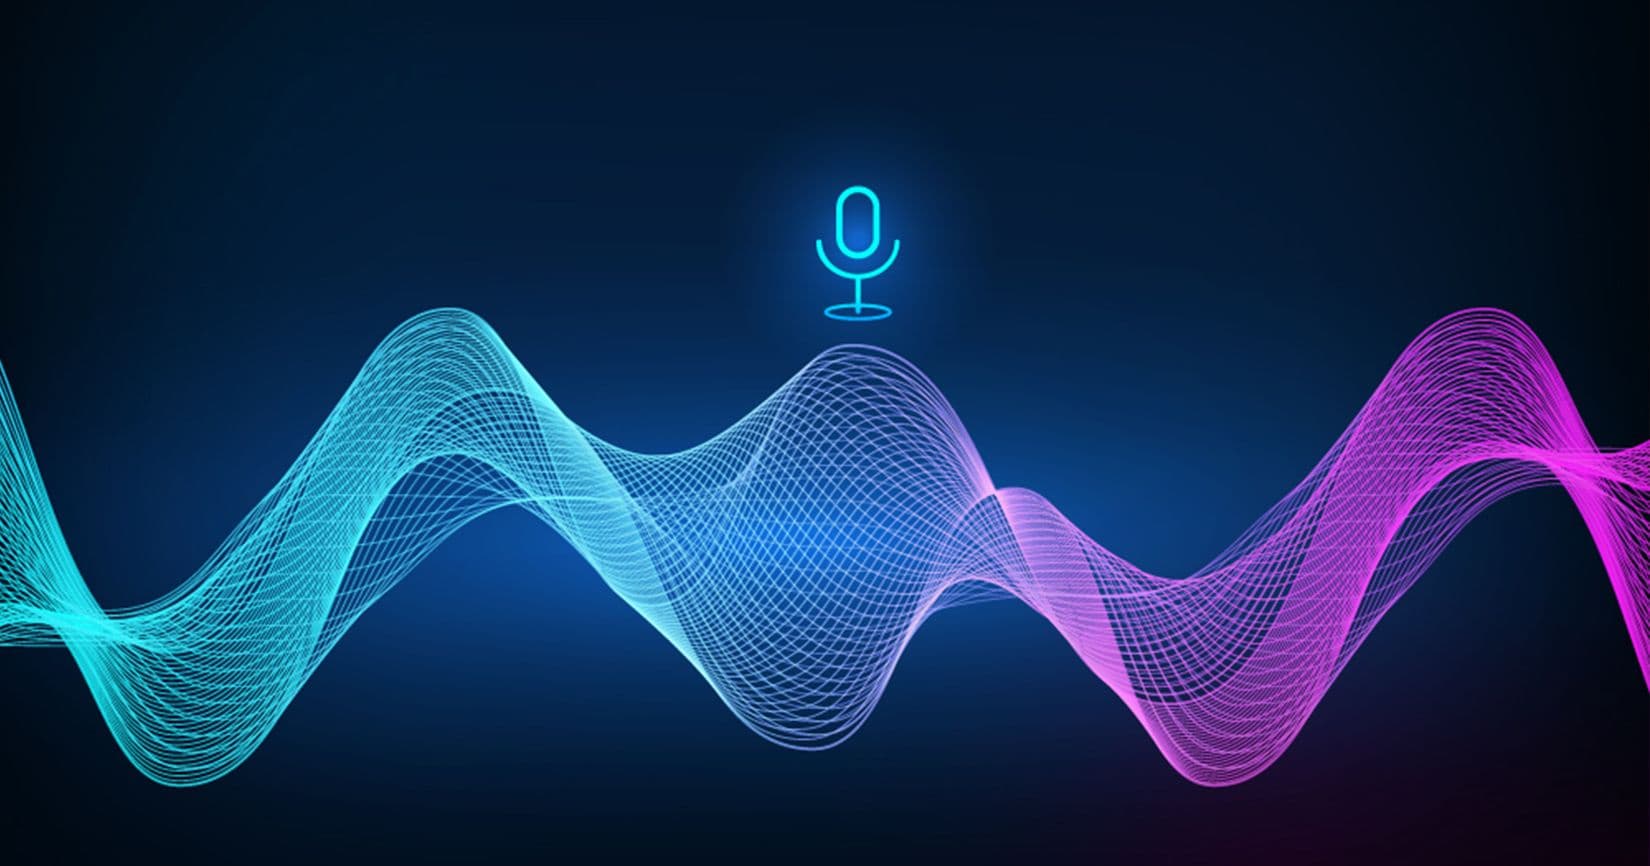 "Harnessing the Power of Speech Analytics in Contact Centers post thumbnail"